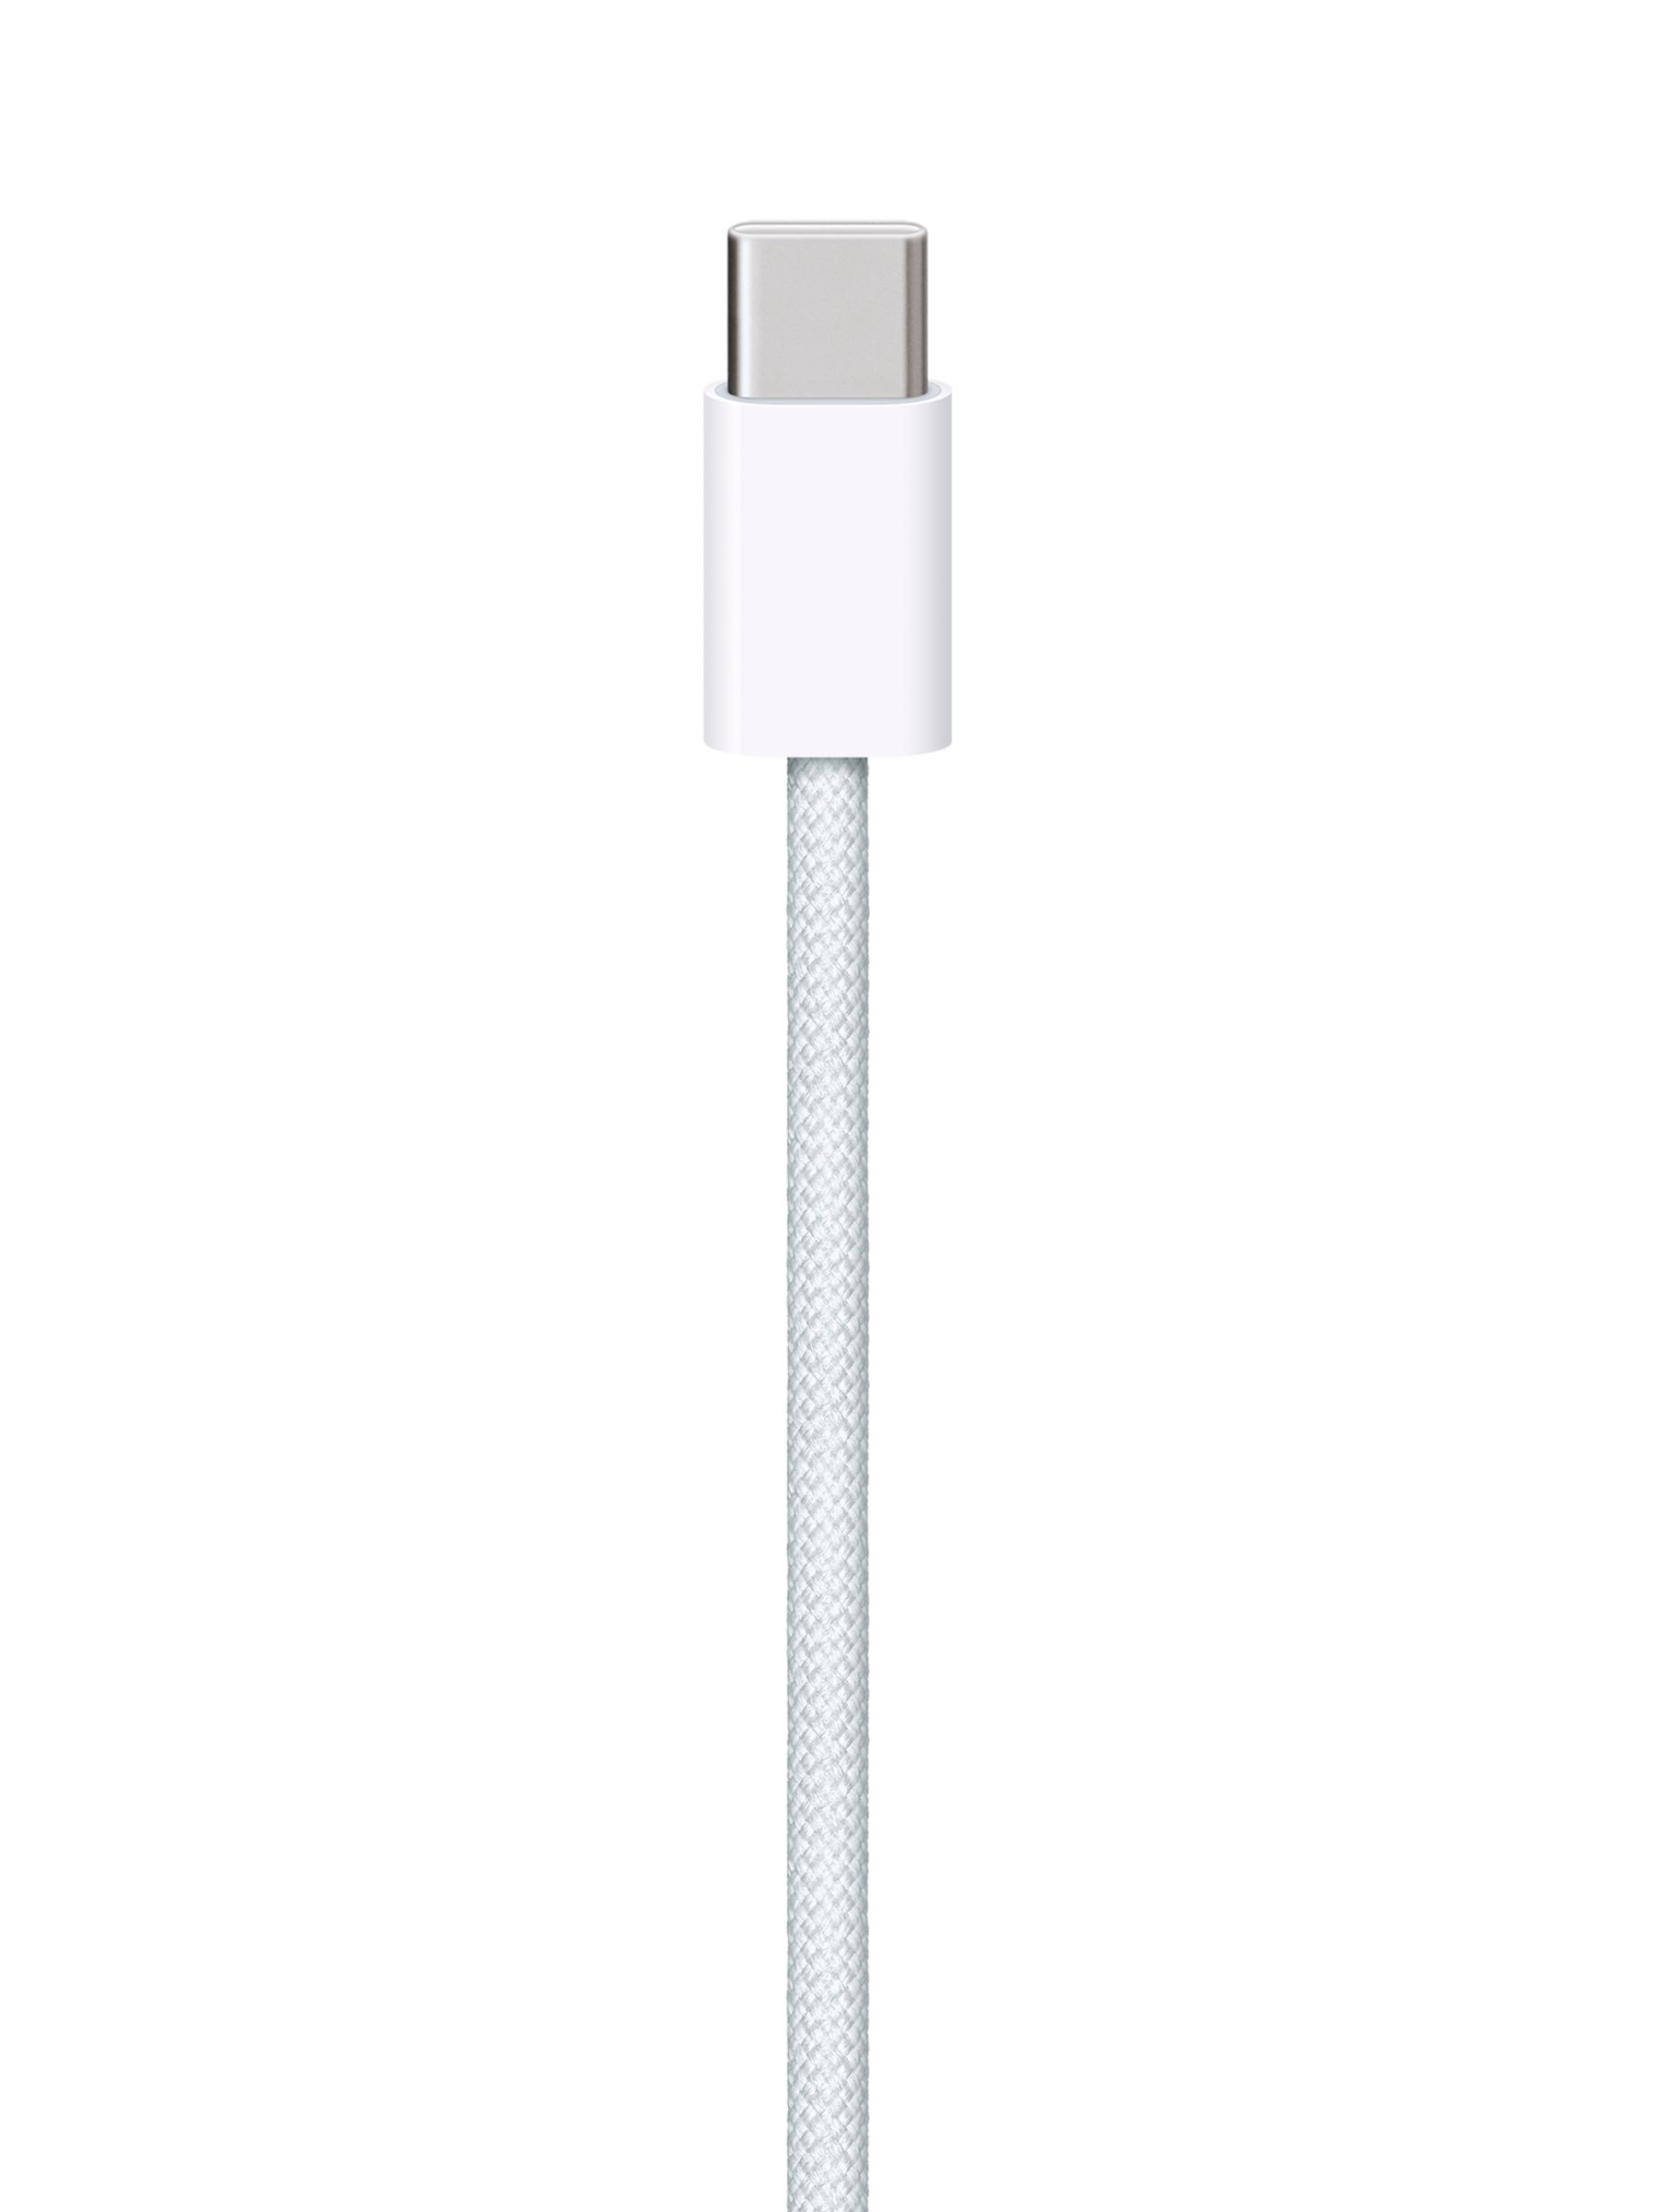 Apple Lightning to USB Cable (1M)